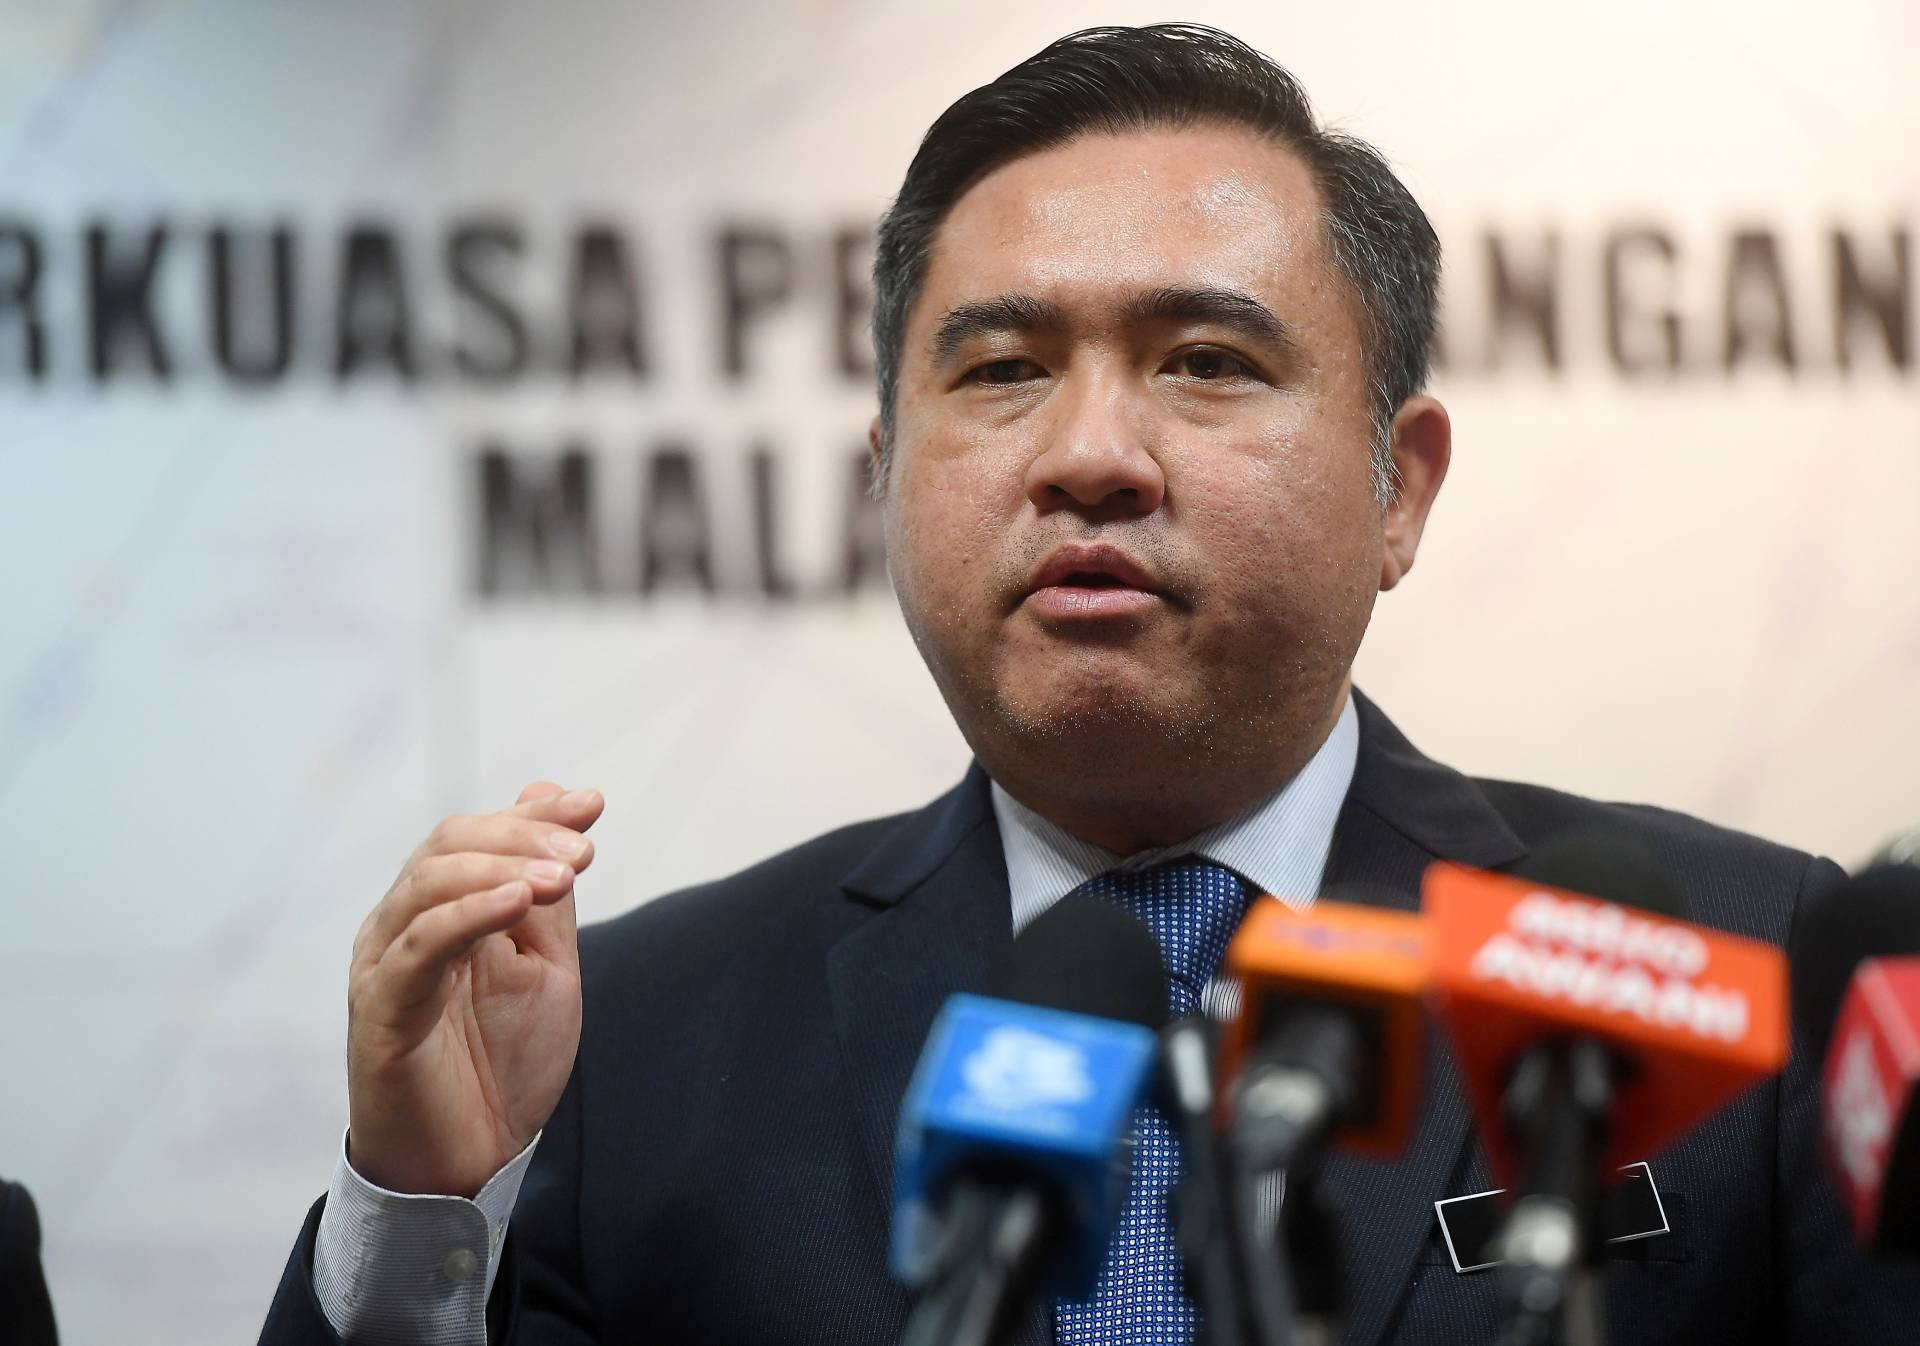 Anthony loke voted as best minister in latest govt' 100-days performance survey